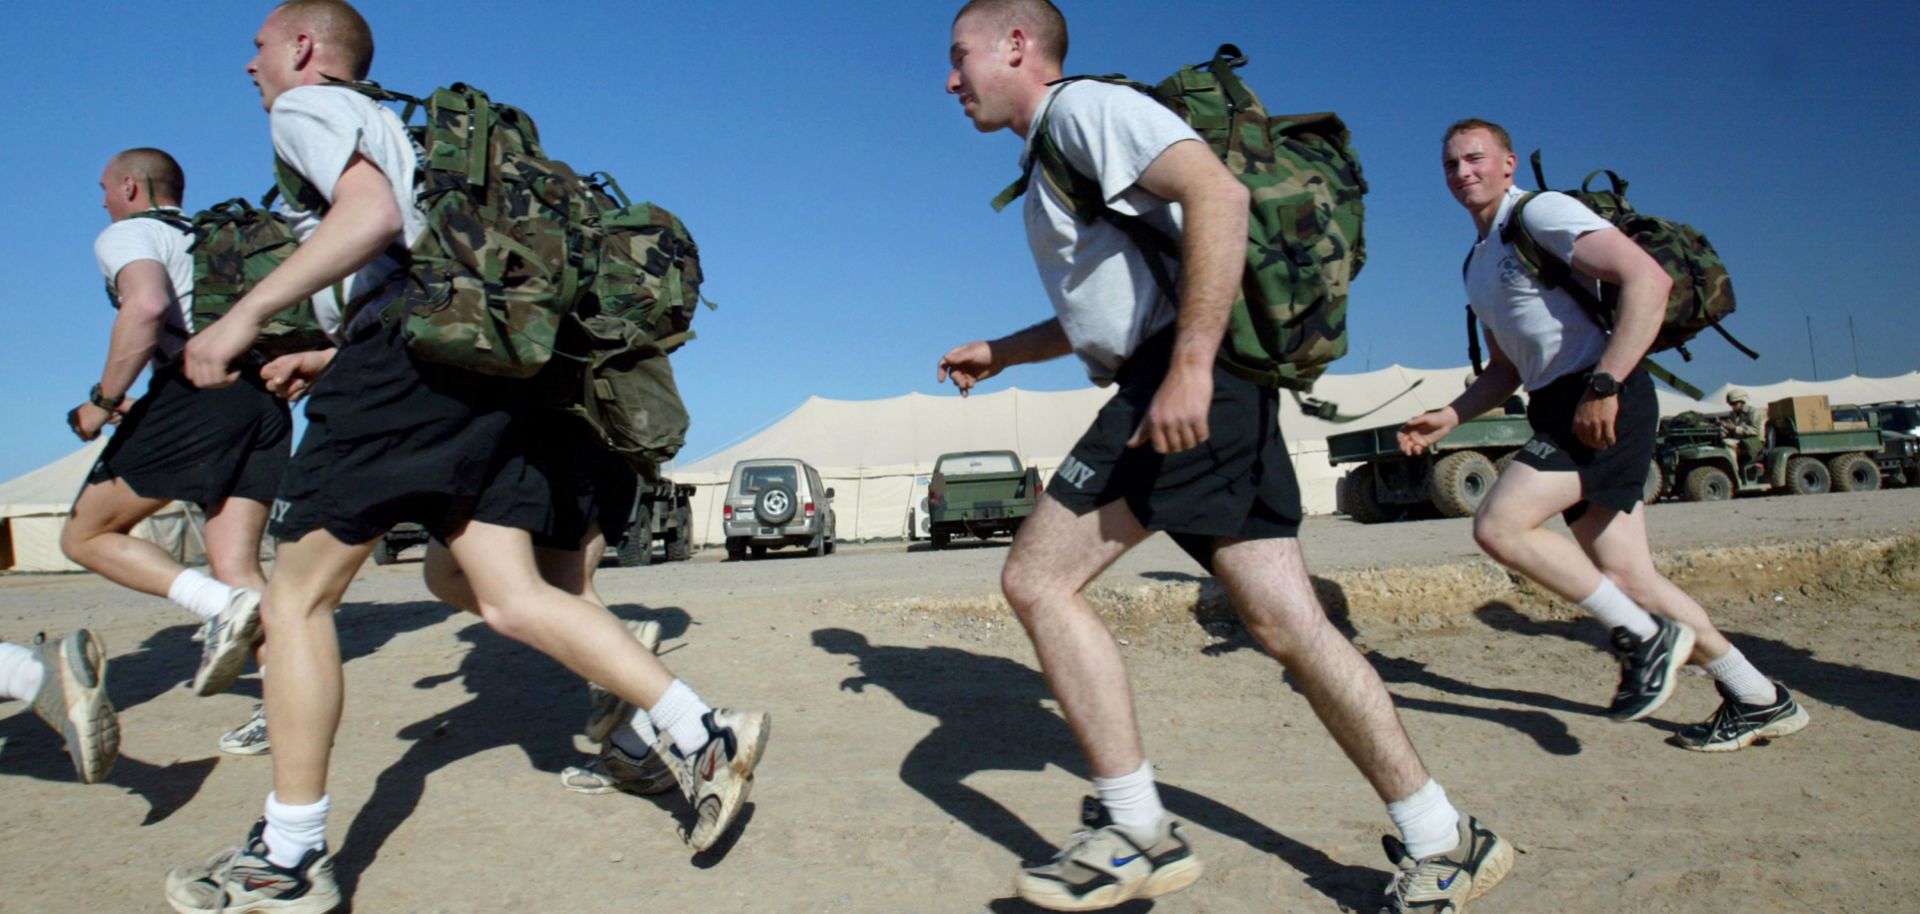 Declining fitness levels not only affect military recruiting, but they also contribute to injuries among service personnel during training.